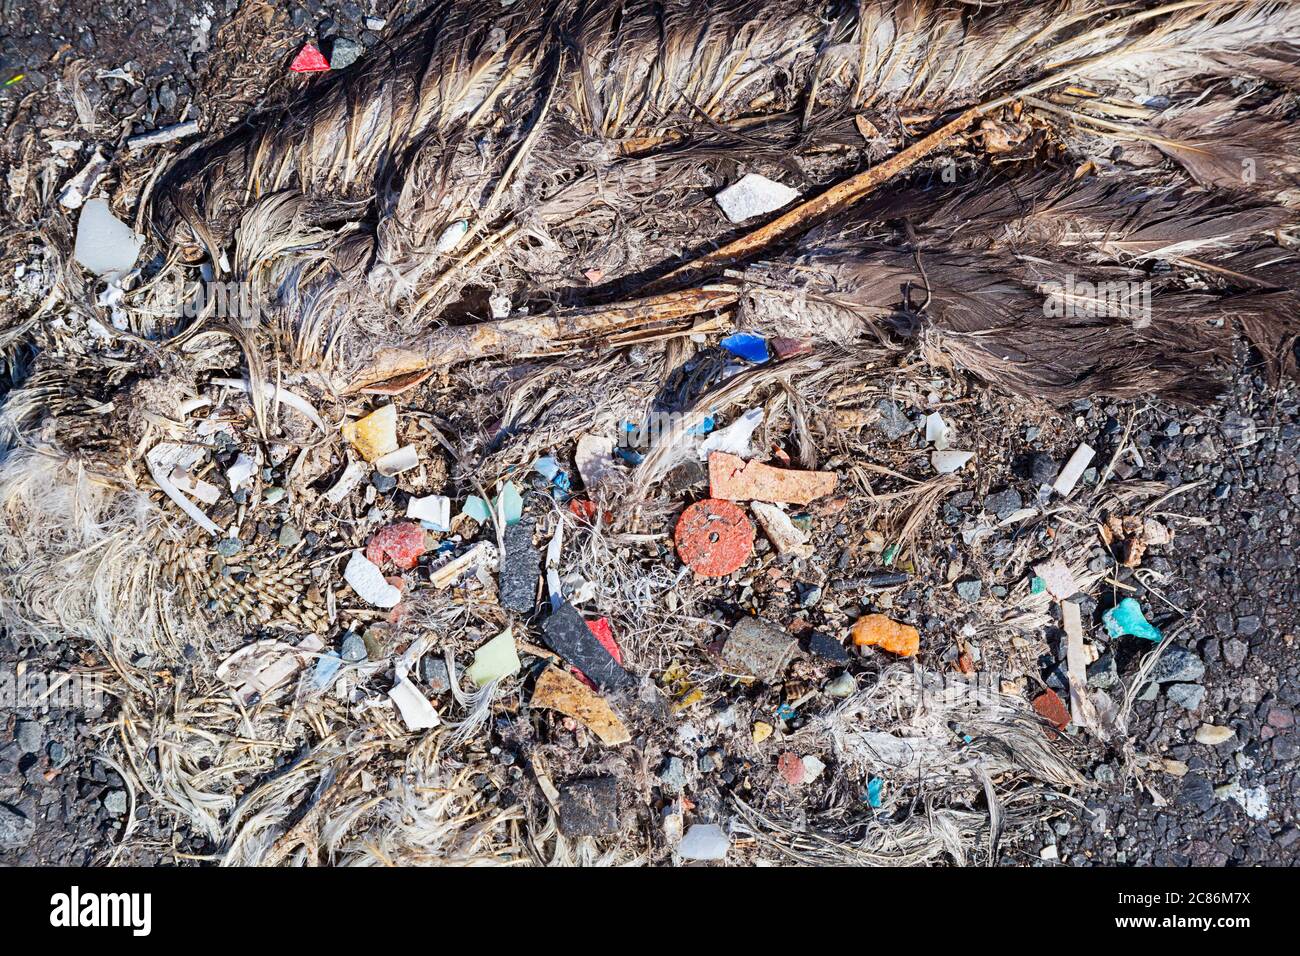 carcass of Laysan albatross, Phoebastria immutabilis, showing plastic in digestive tract that probably killed it, Sand Island, Midway Atoll NWR, USA Stock Photo